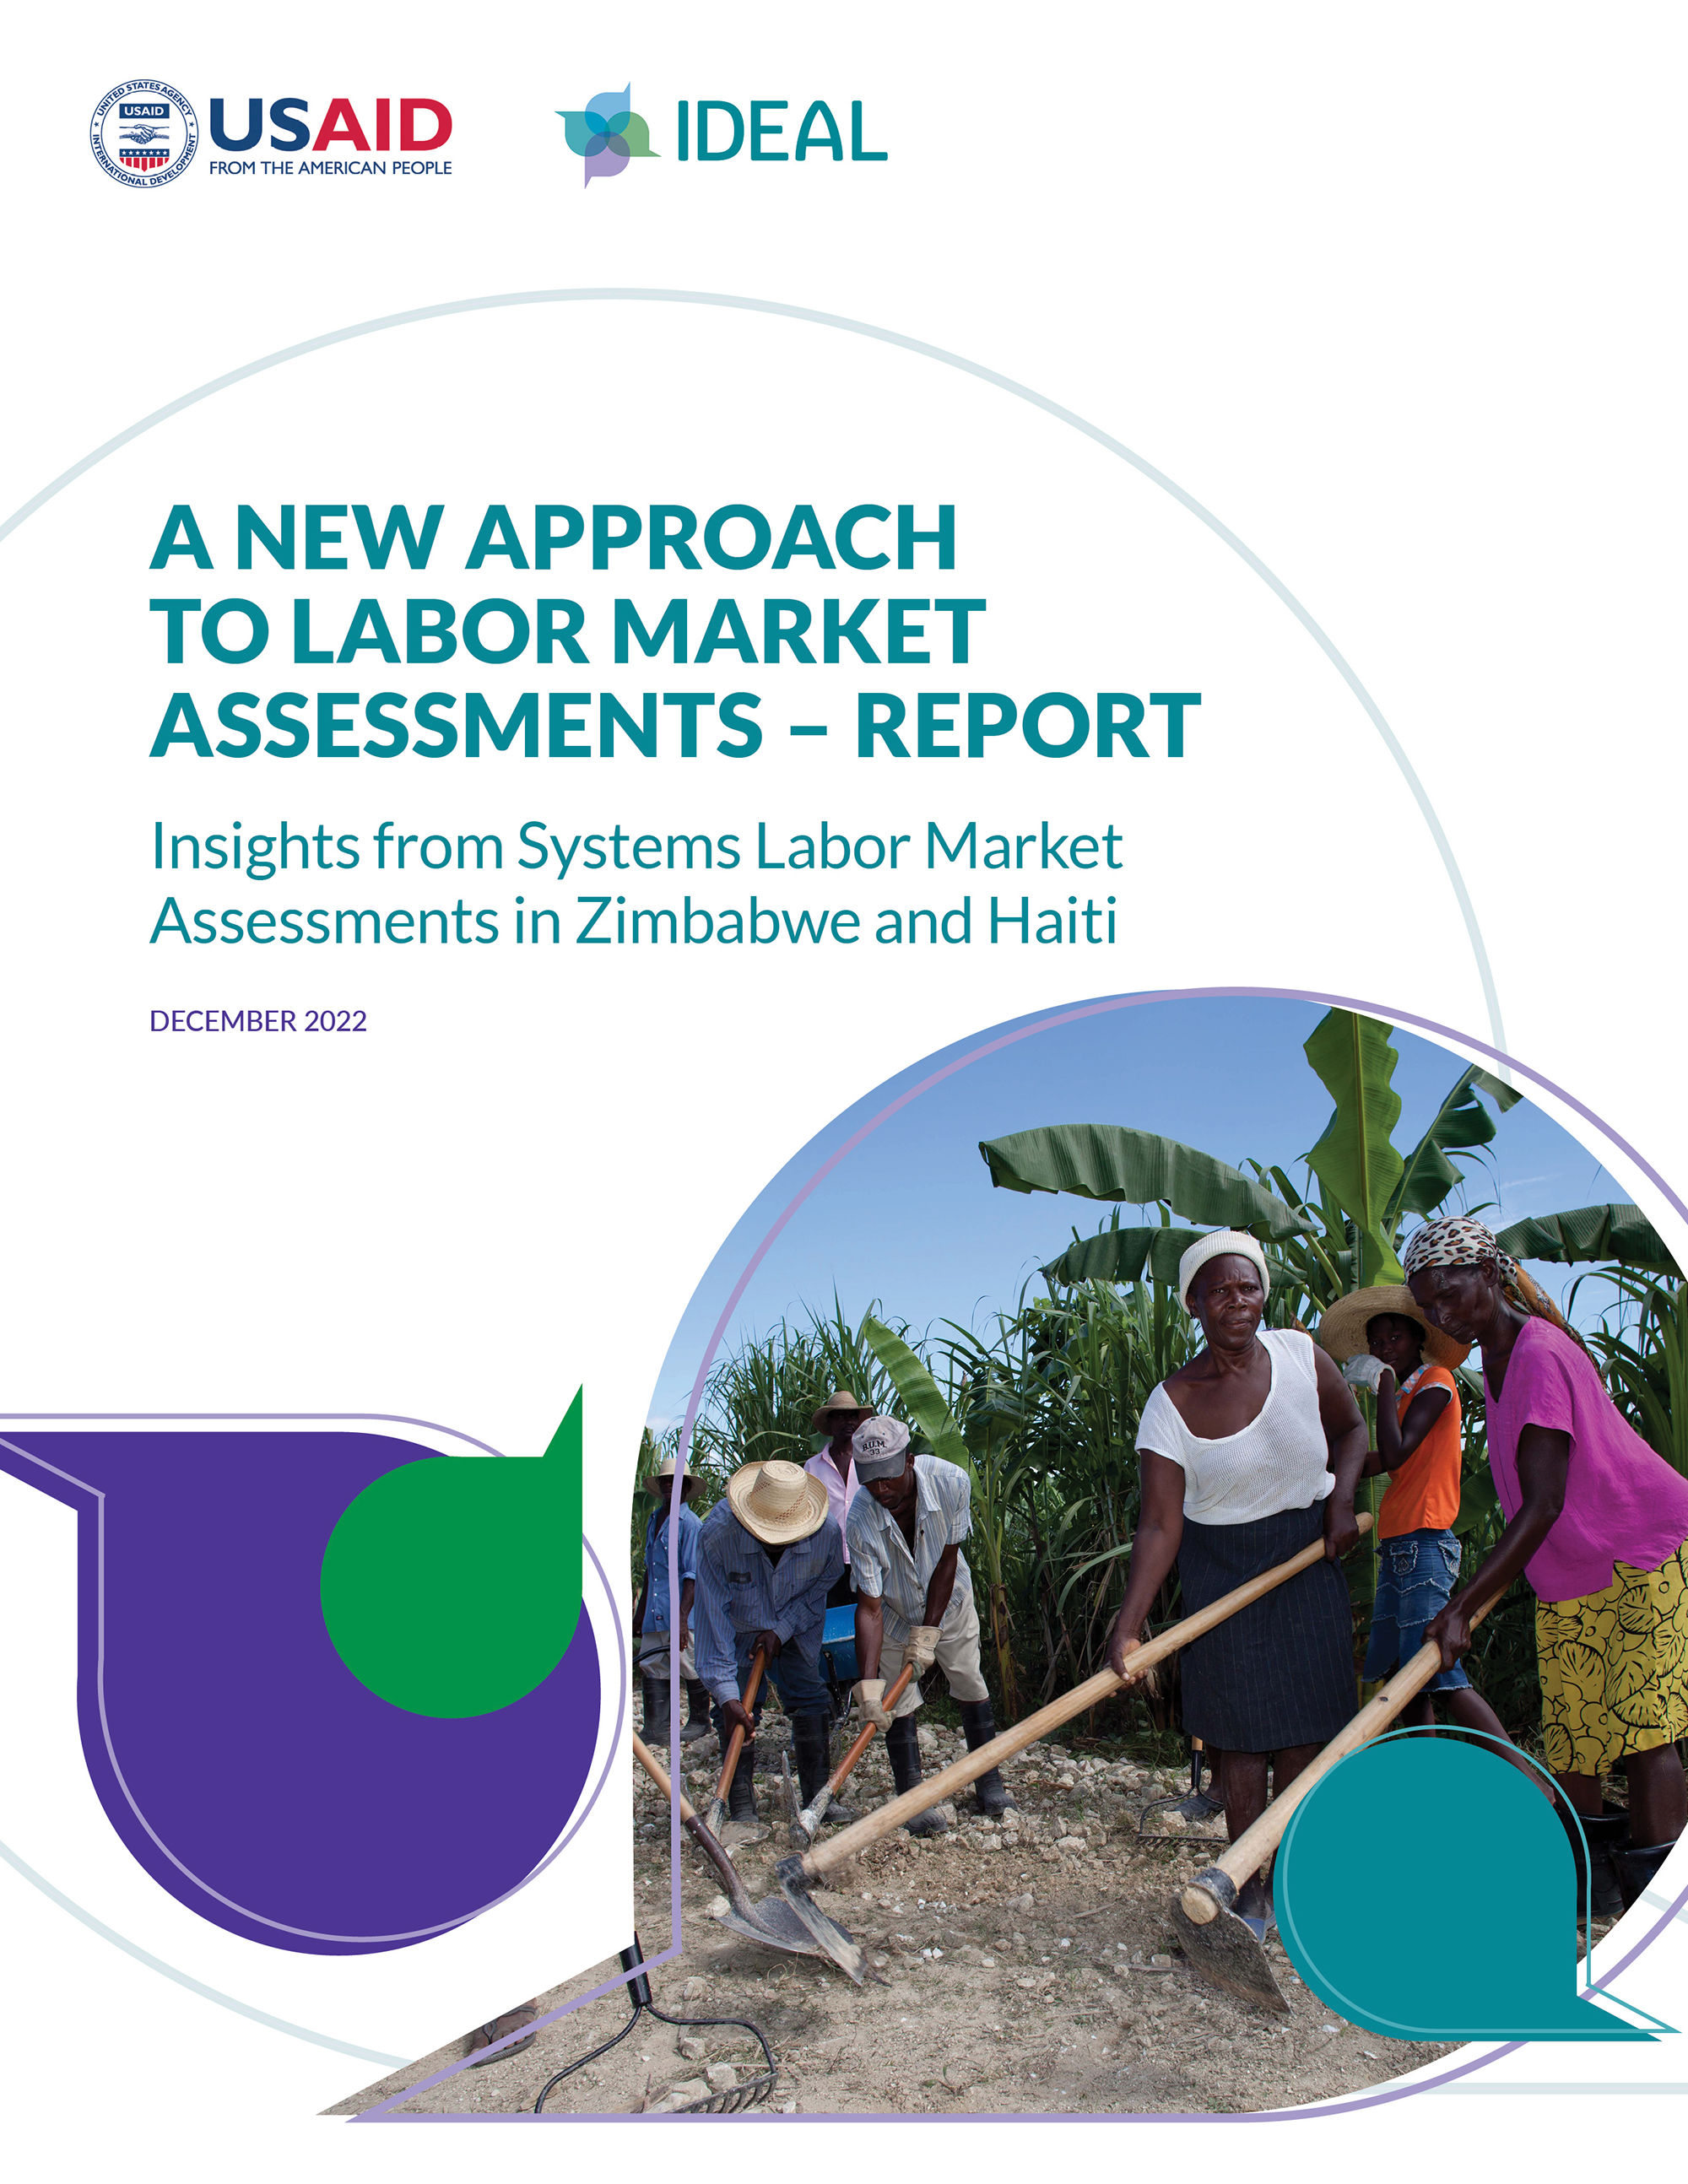 Cover page that includes the USAID and IDEAL logos, the title of the report, and a photo showing a group of cash-for-work participants rehabilitating a road in their community in Haiti. A group of men and women use shovels, pickaxes, and other tools to repair a rocky road. The title of the report is: A New Approach to Labor Market Assessments - Report: Insights from Systems Labor Market Assessments in Zimbabwe and Haiti